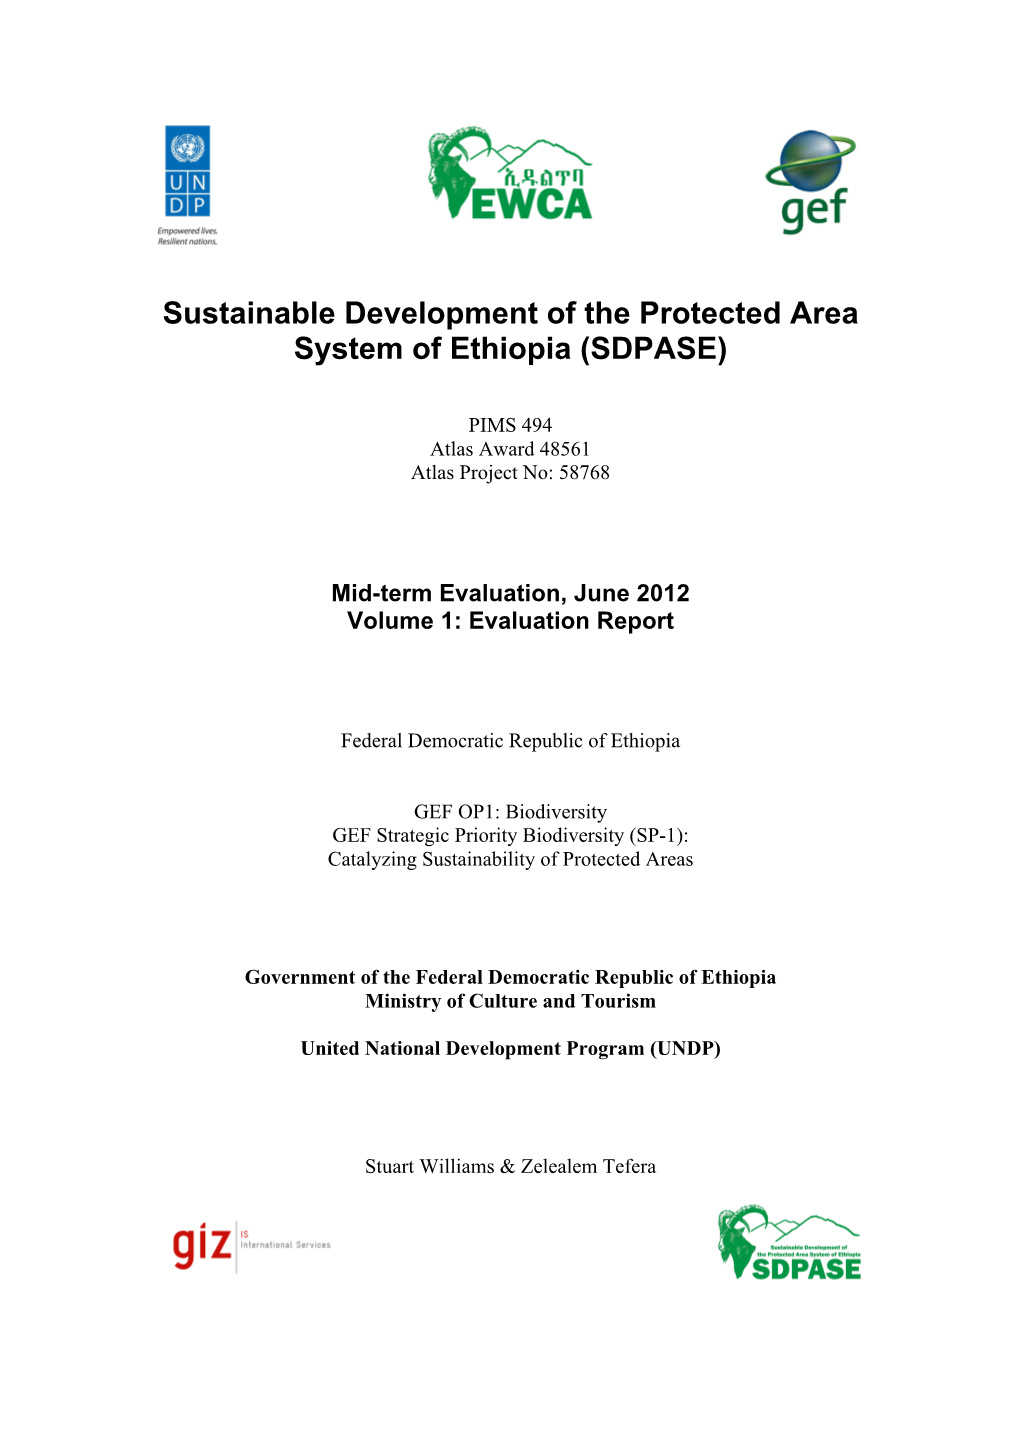 Sustainable Development of the Protected Area System of Ethiopia (SDPASE)